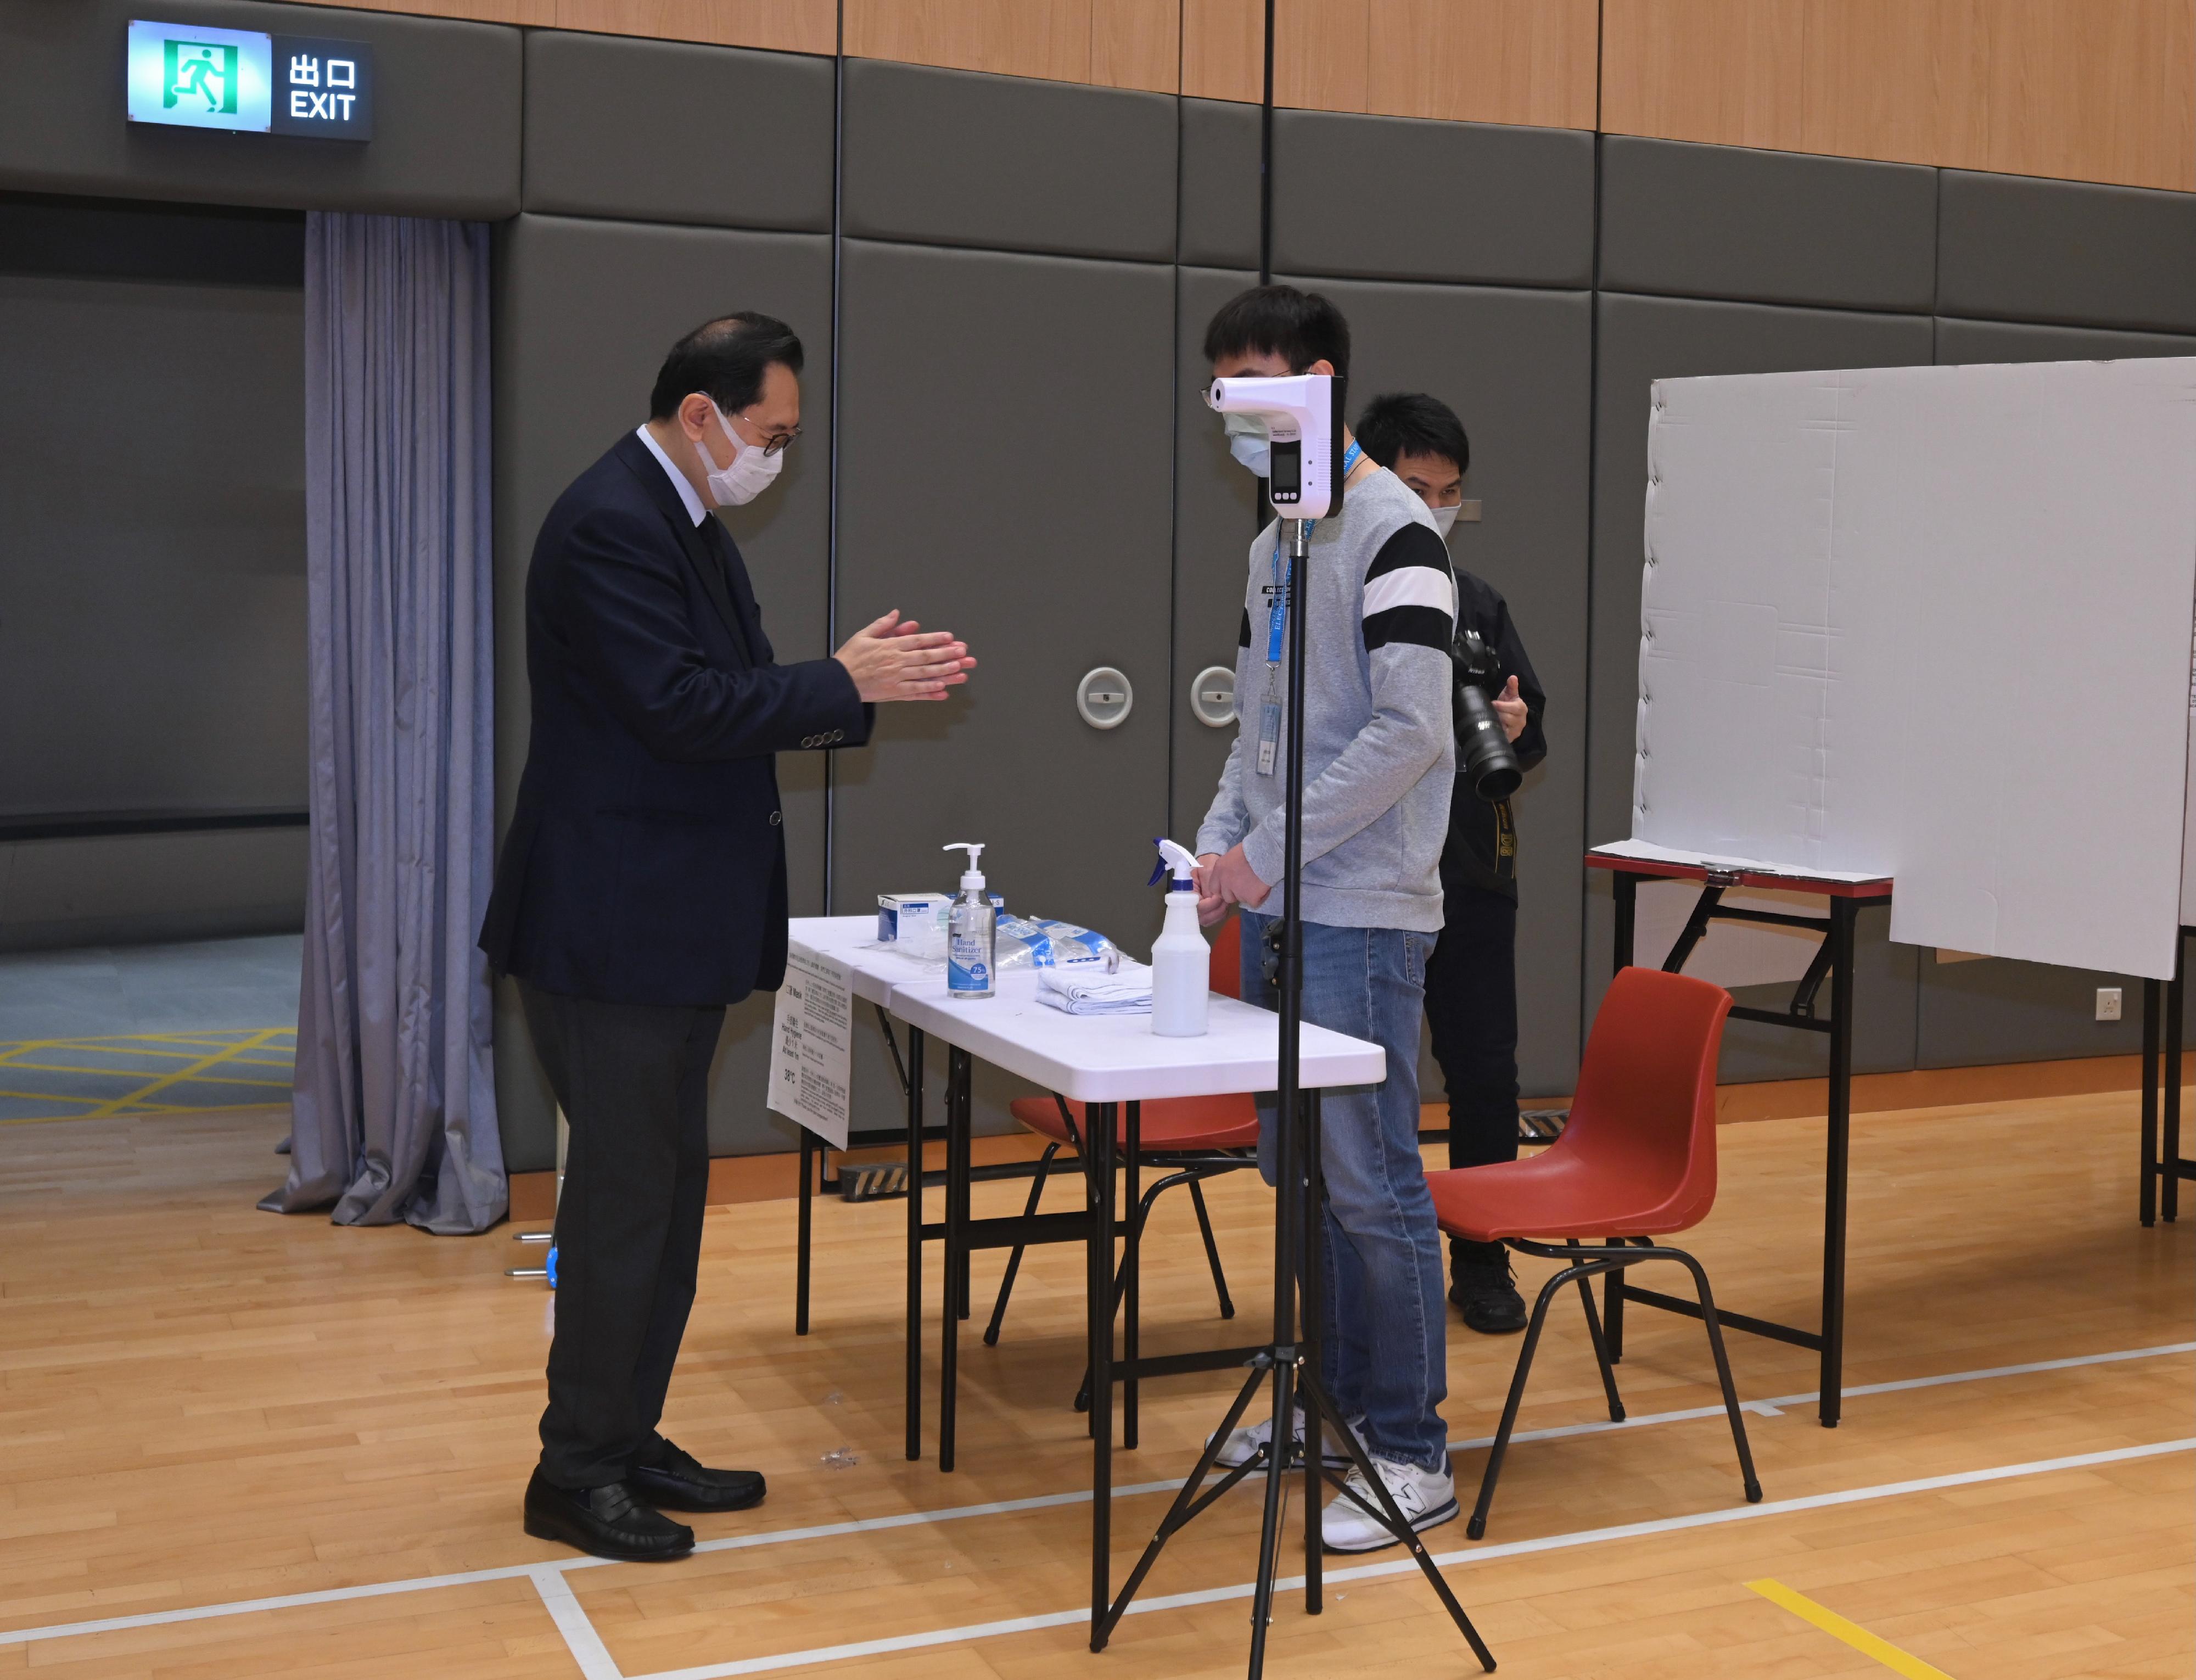 The Chairman of the Electoral Affairs Commission, Mr Justice Barnabas Fung Wah (first left), demonstrates the proper procedure to cast votes in the Legislative Council General Election during his visit to a mock polling station at the North Point Community Hall today (December 14).